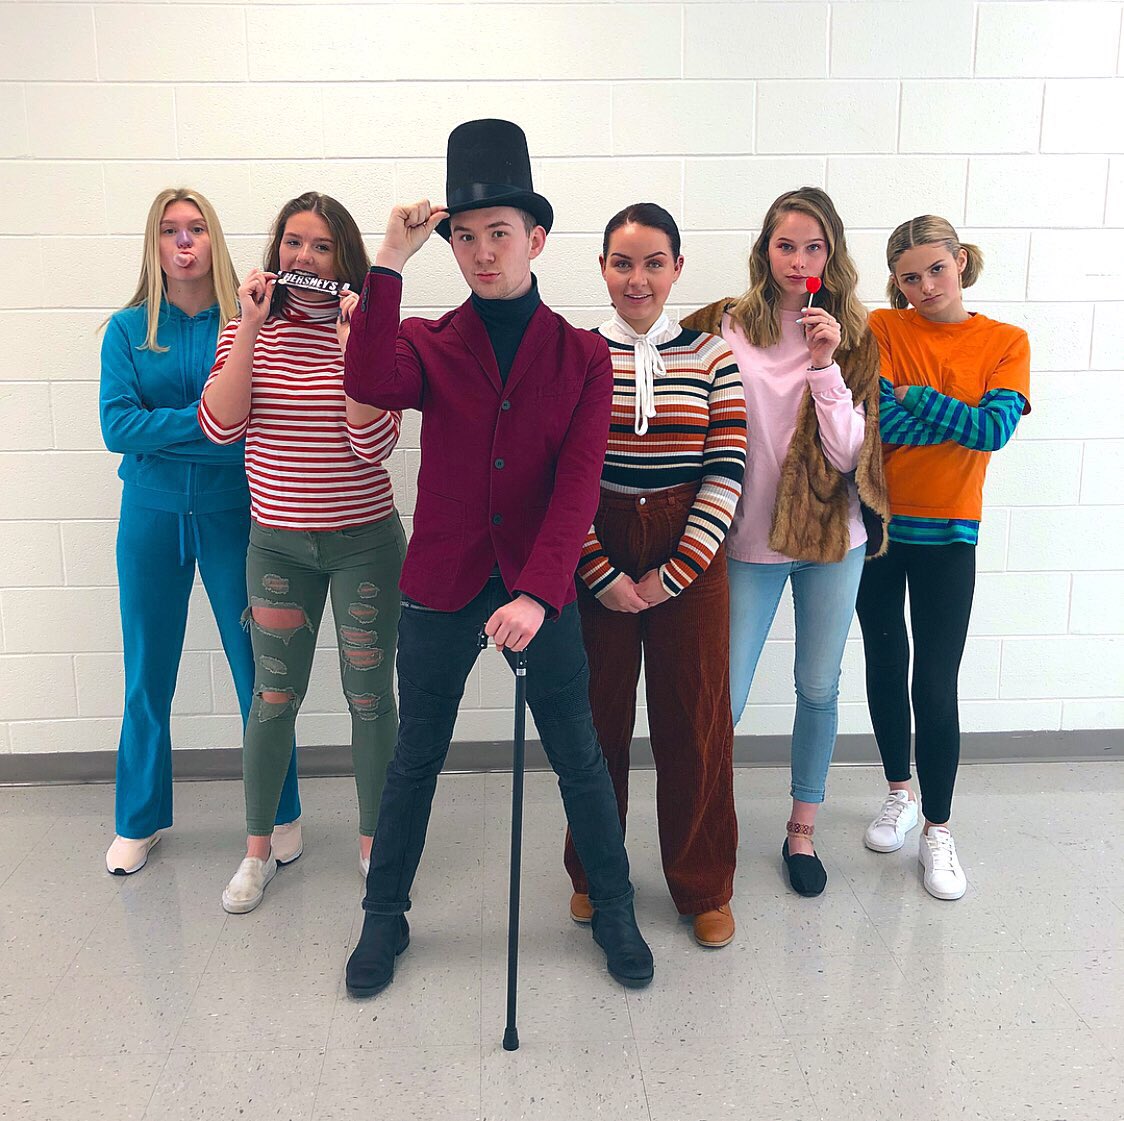 I don’t know. I HATE CHOCOLATE! 🍬🍭🍫🍿🍩🍧🍡#WillyWonka #CharlientheChocolateFactory #SpiritWeek2019